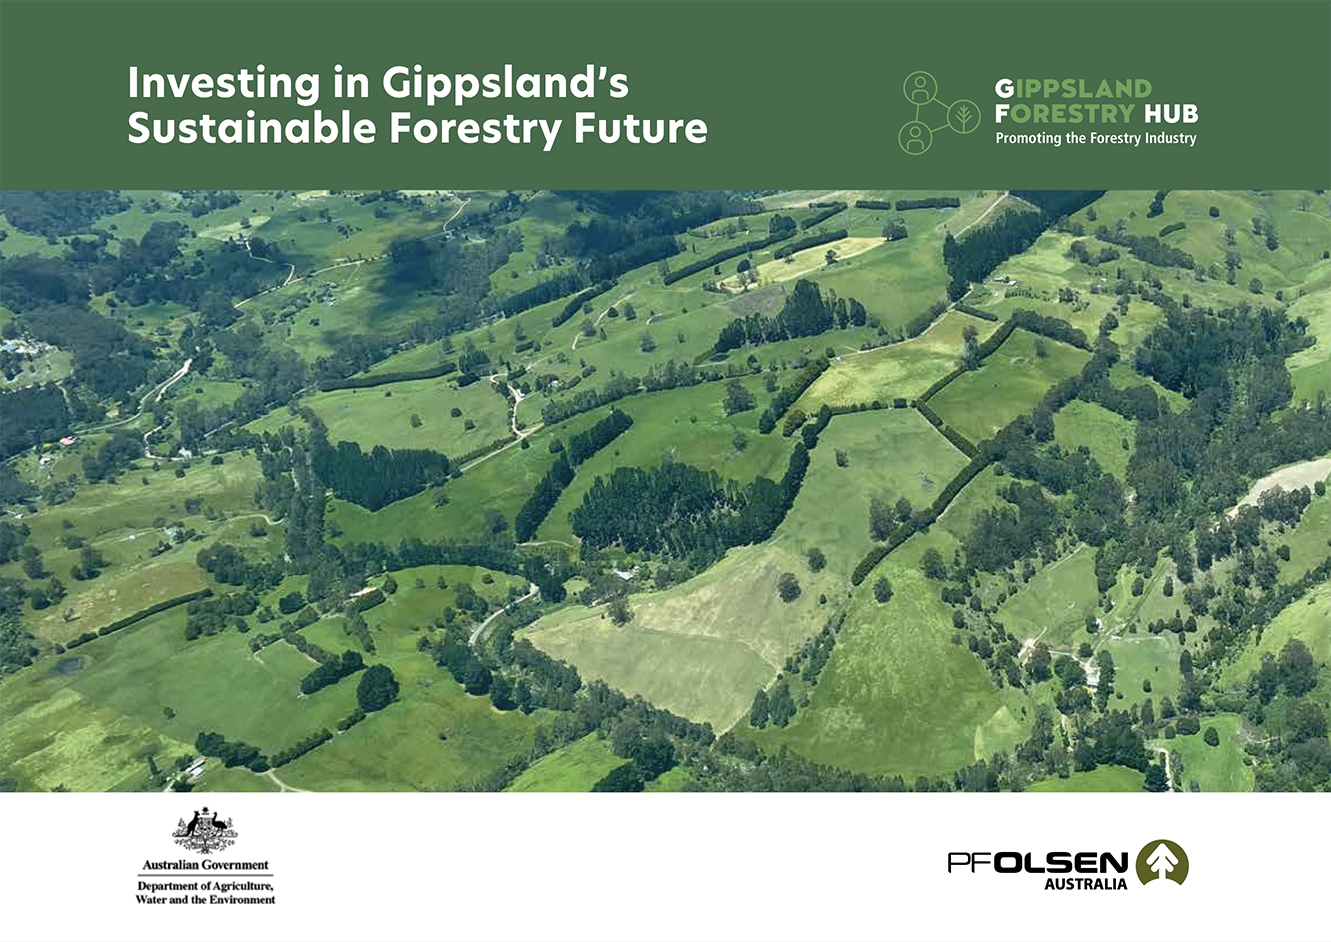 Image of the cover of the Investing in Gippsland report